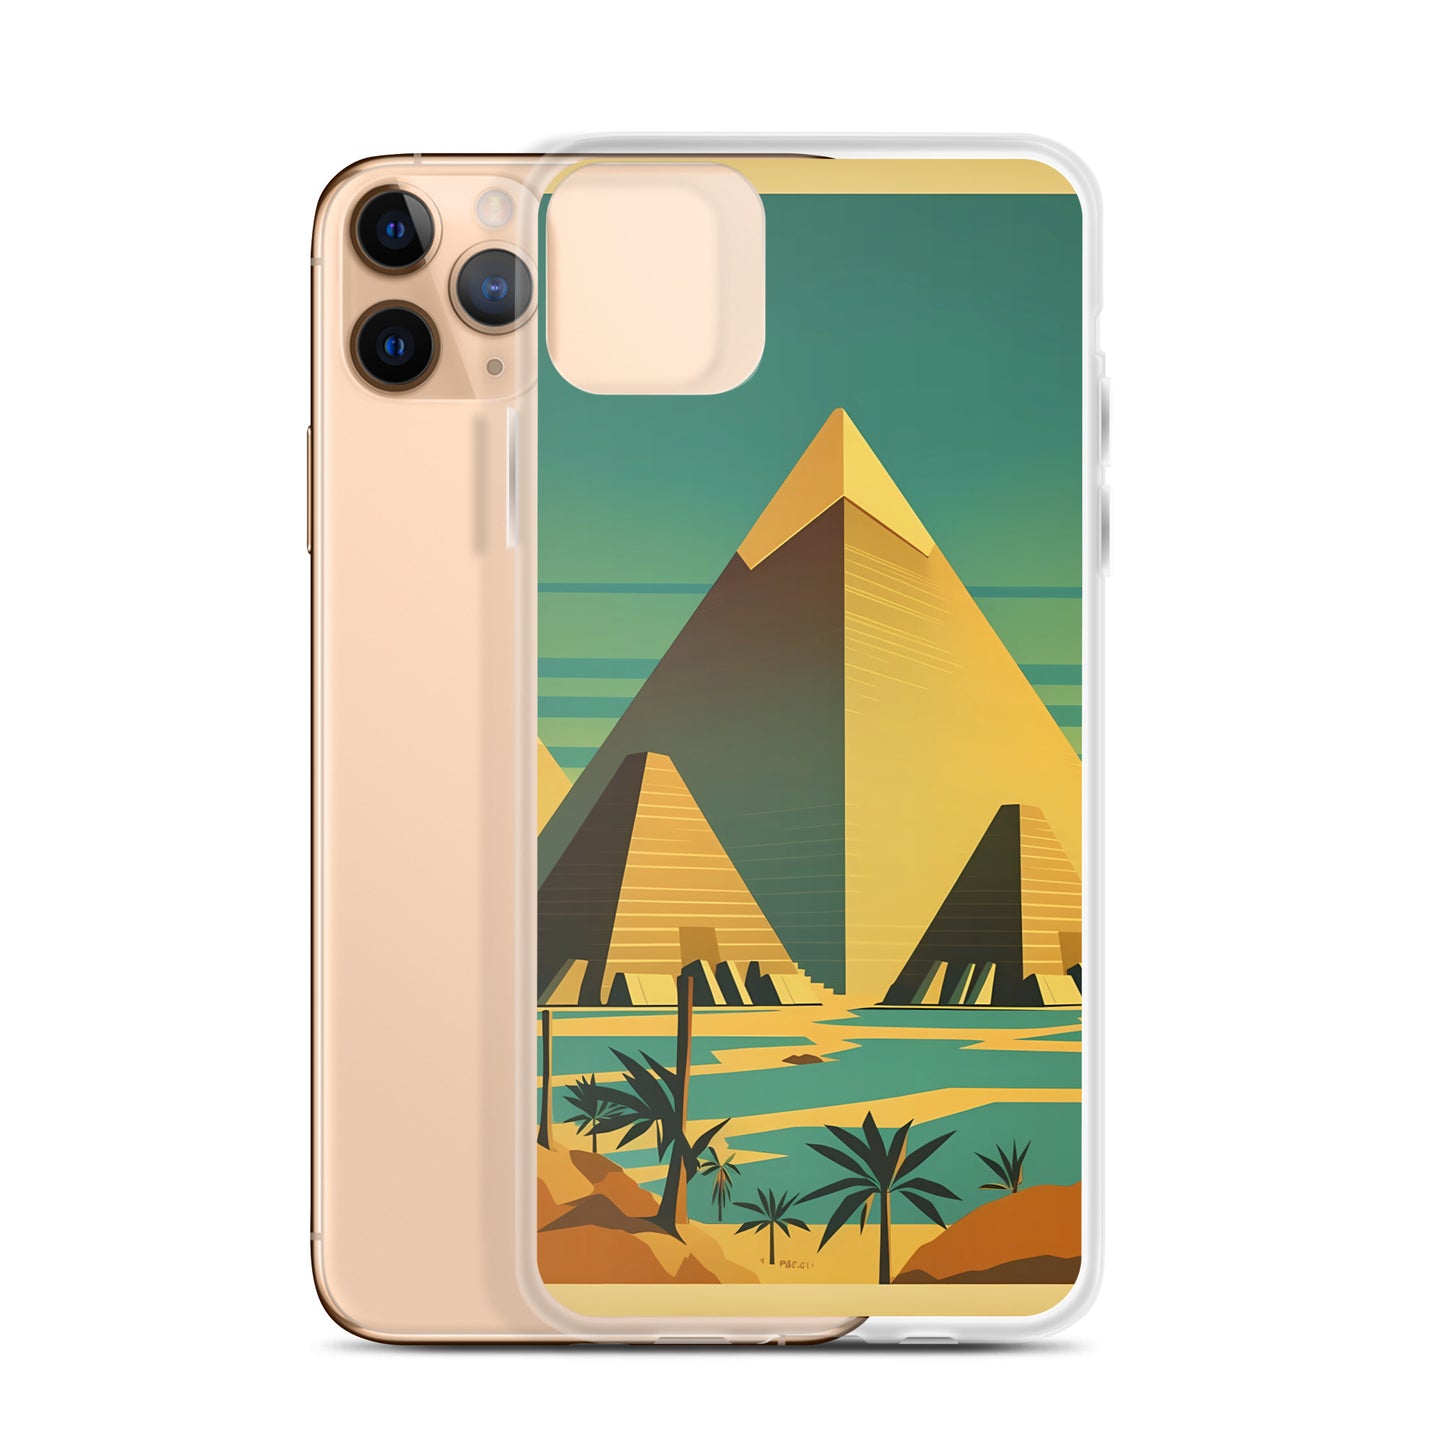 iPhone Case - Vintage Adverts - Egyptian Pyramids